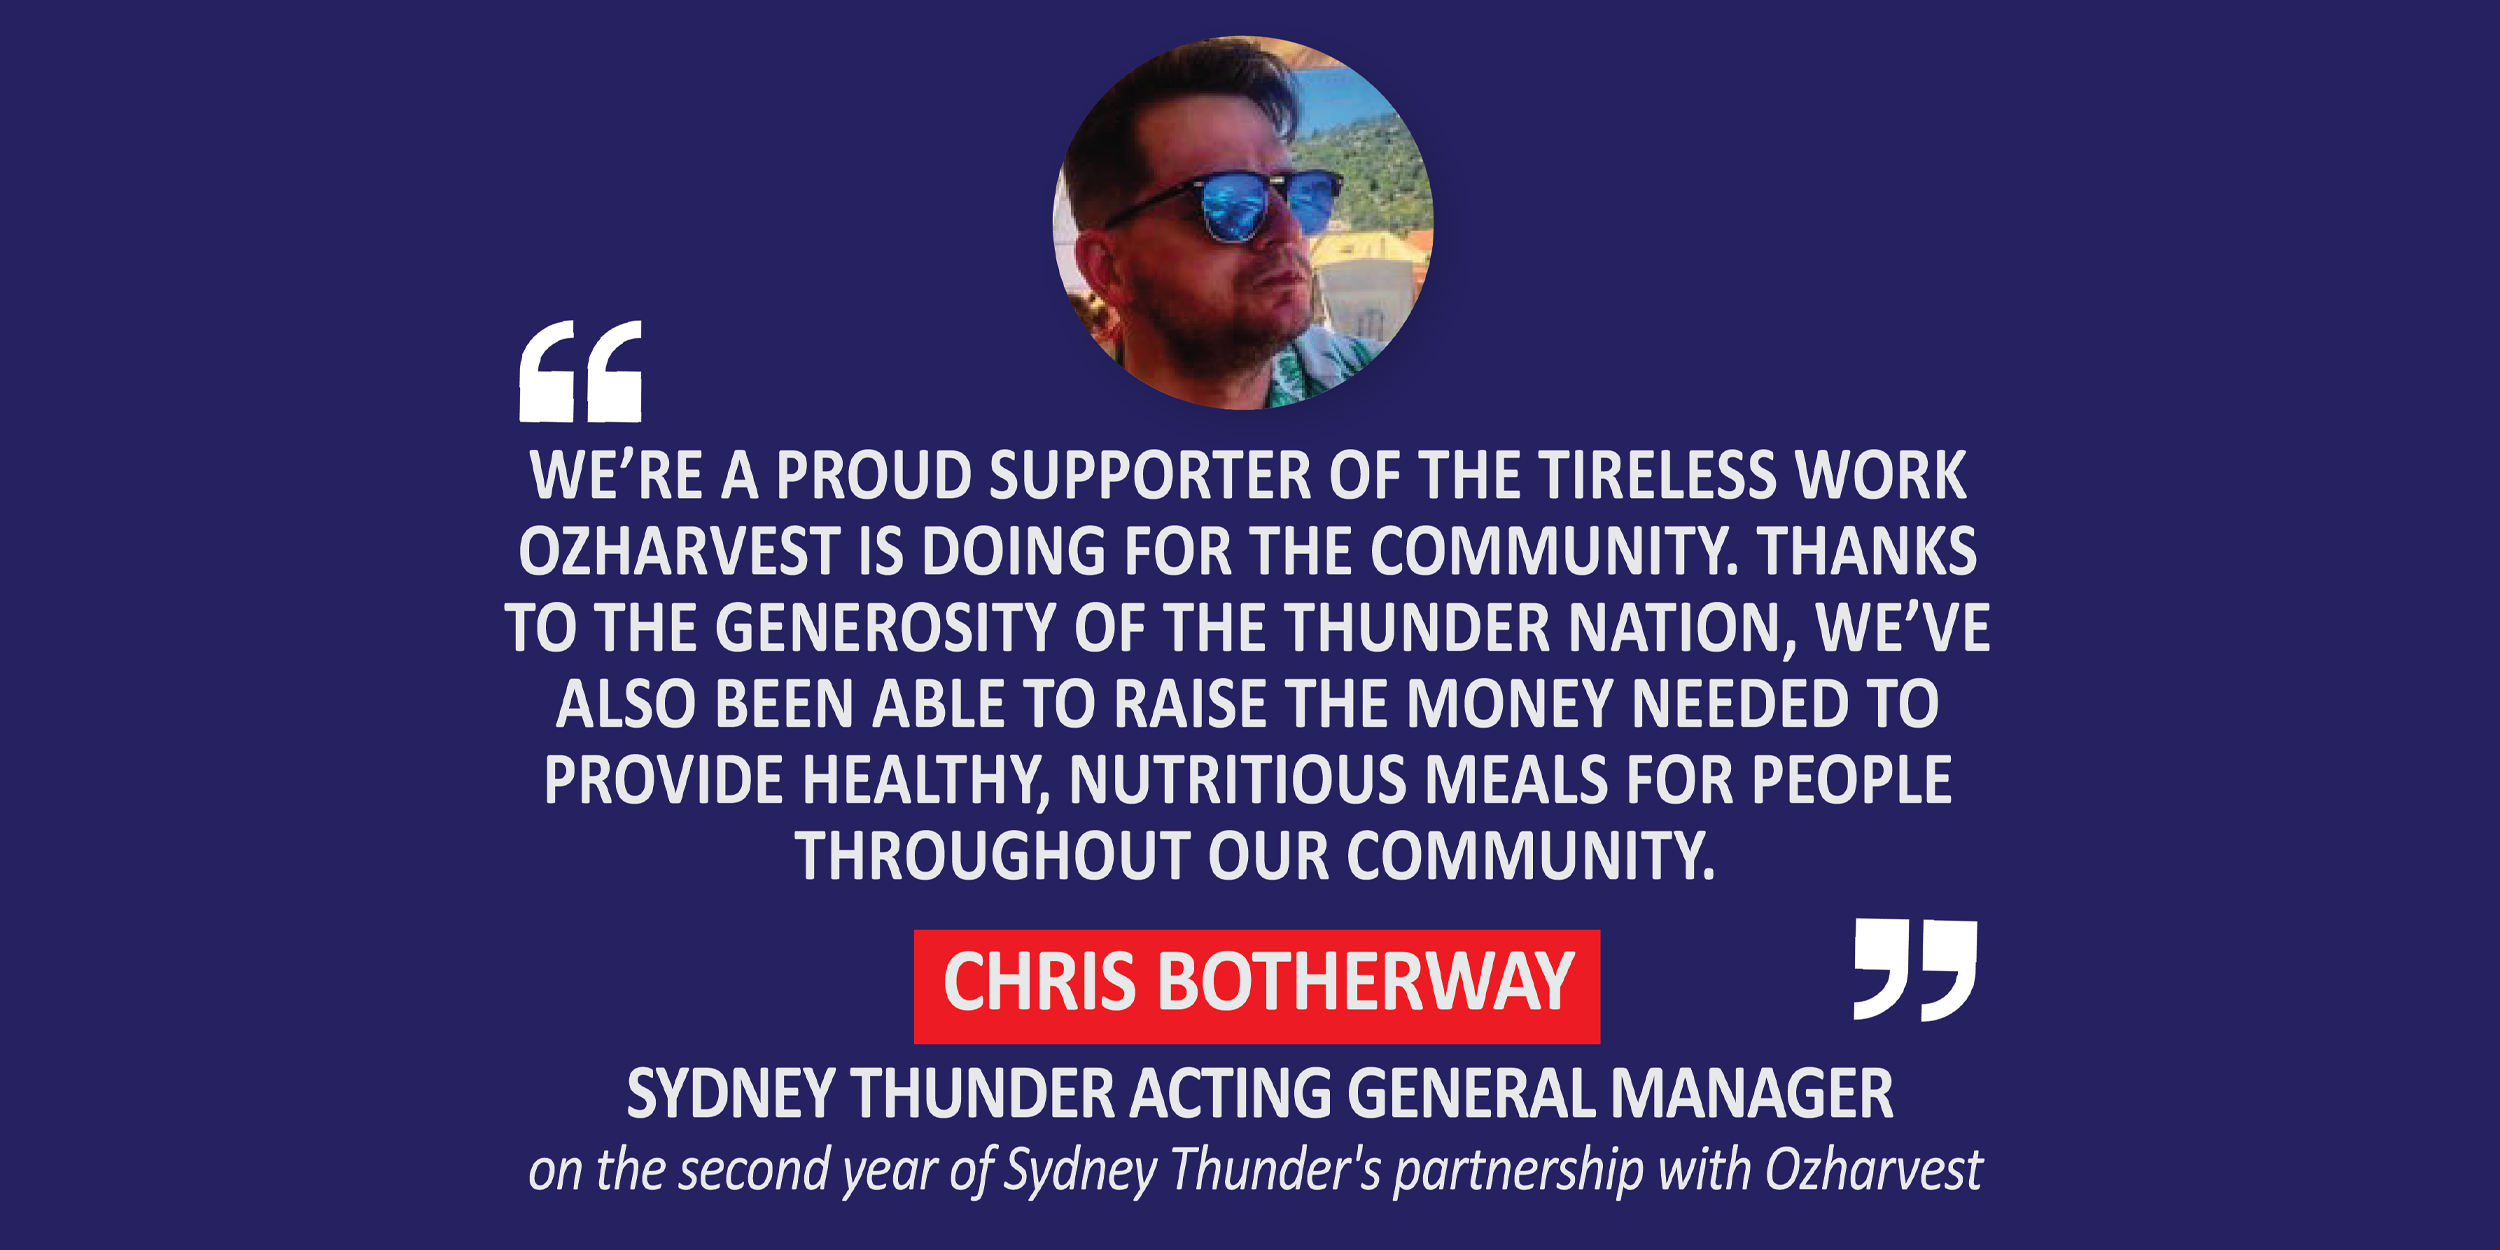 Chris Botherway, Sydney Thunder Acting General Manager on the second year of Sydney Thunder's partnership with Ozharvest